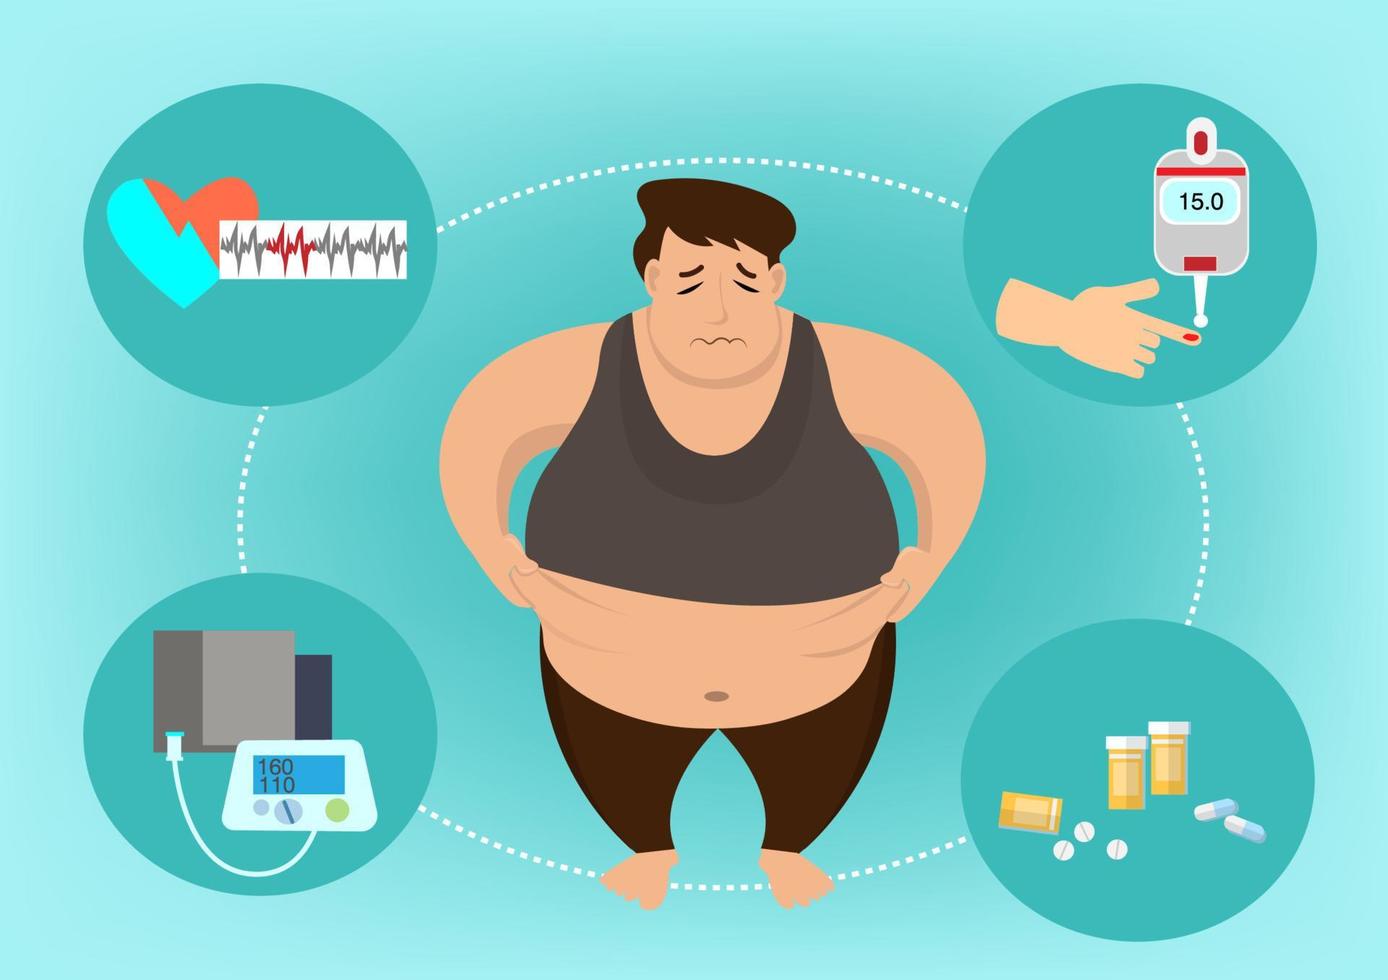 Overweight problems, heart disease treatment, obesity health problems, high blood pressure, high blood sugar, passive lifestyle metaphor. Isolated vector concept comparison illustration.